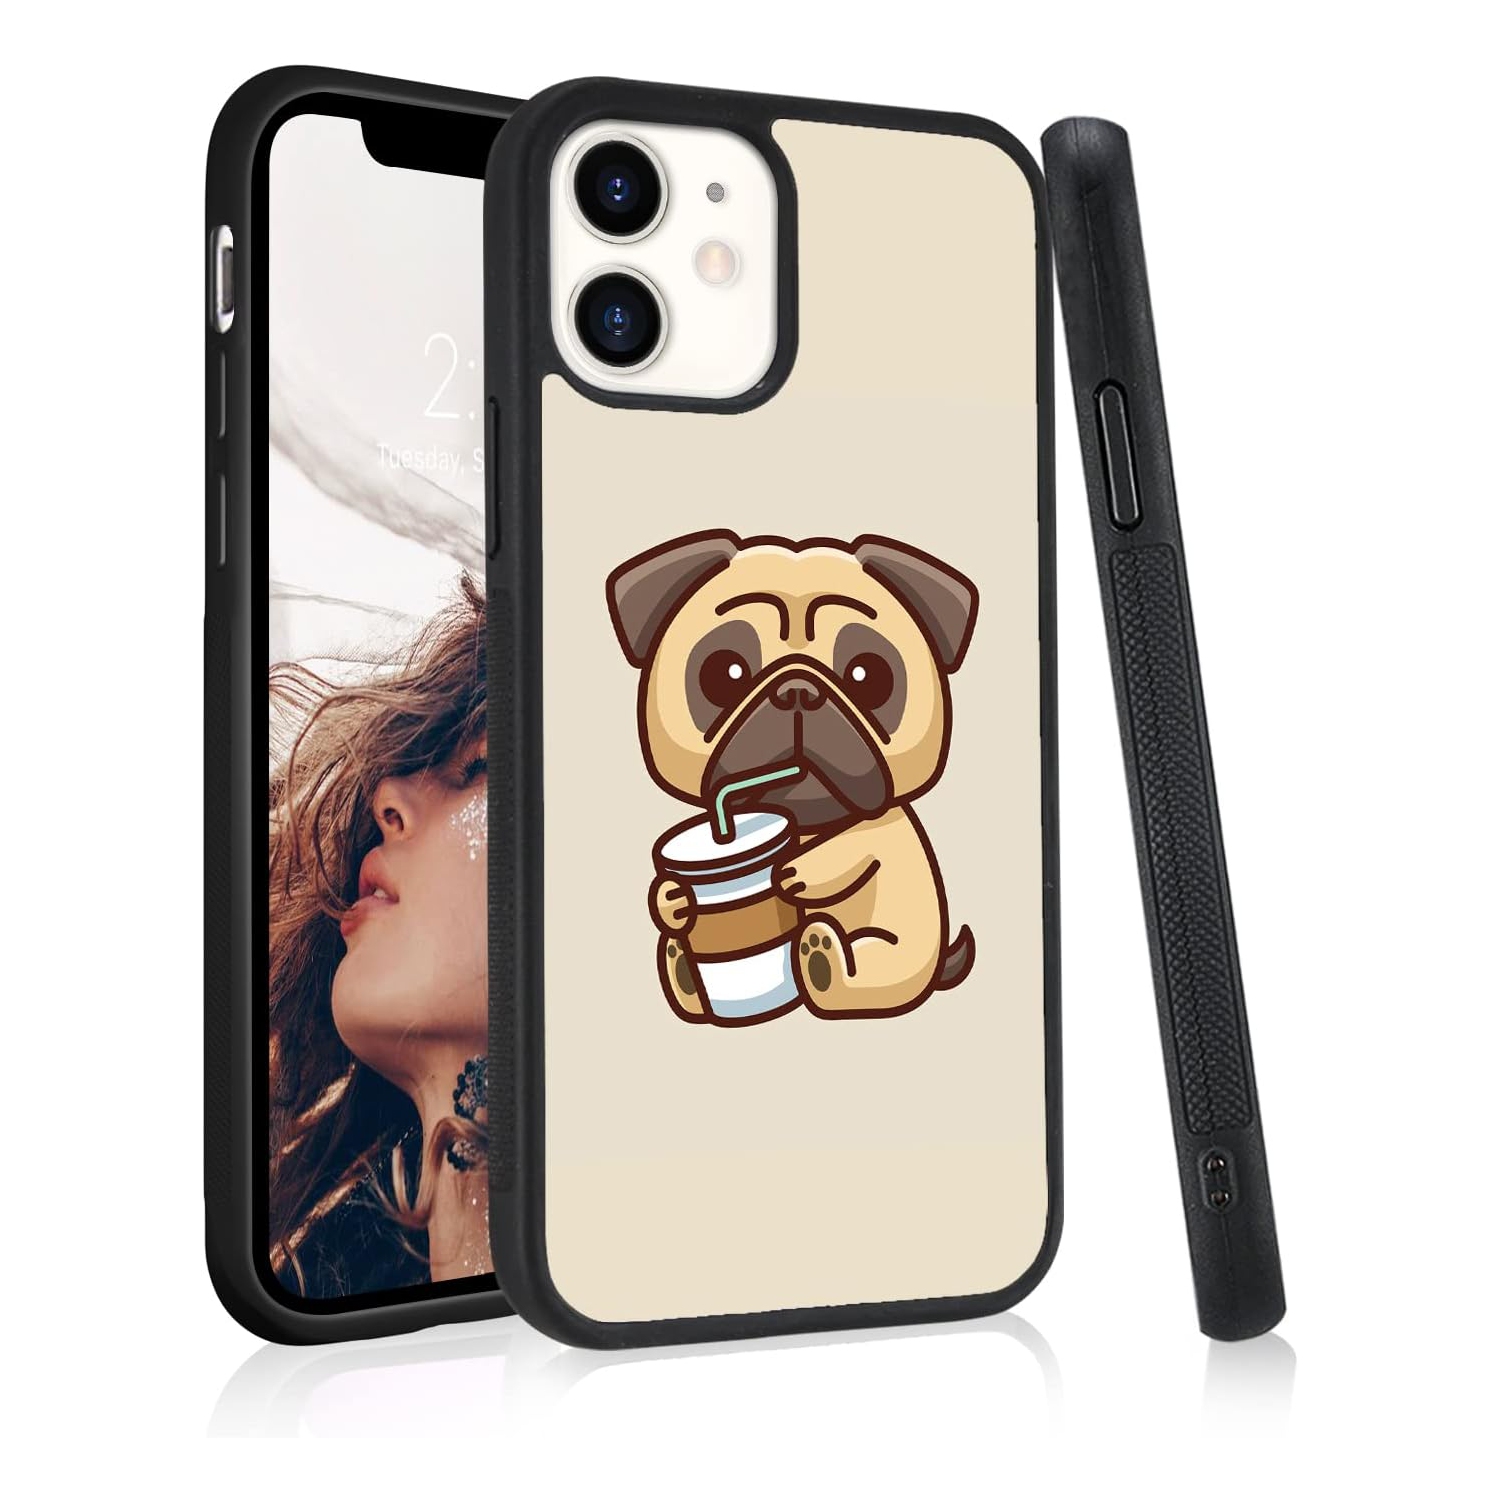 Brown Dog Pattern for iPhone 6/6s Case Shockproof Anti-Scratch Protective Cover Soft TPU Hard Back Cute Animal Slim